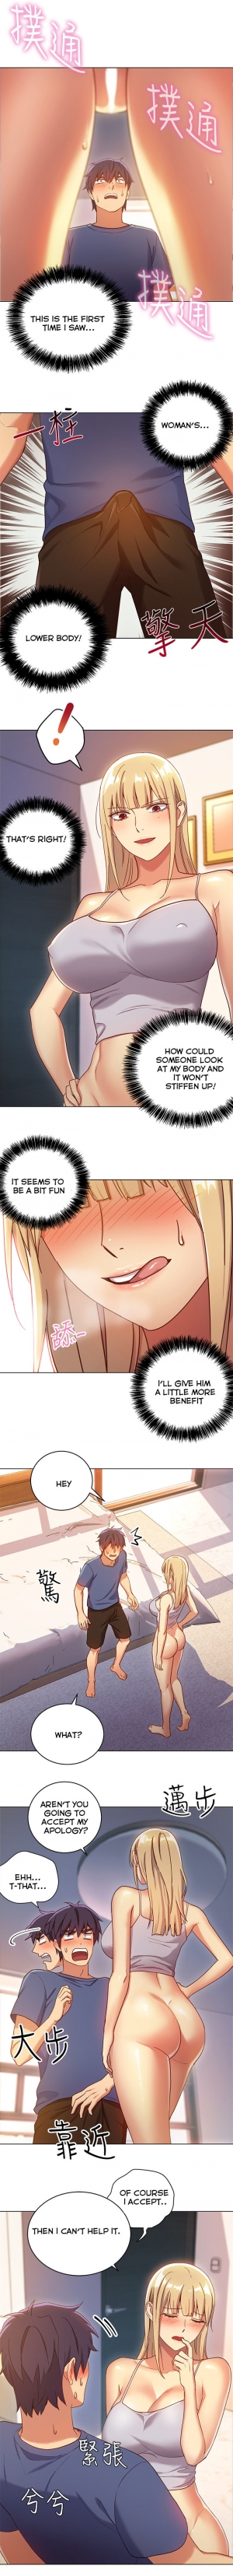  [Neck Pilllow] Stepmother Friends Ch.39/? [English] [Hentai Universe] NEW! 13/10/2020  - Page 59